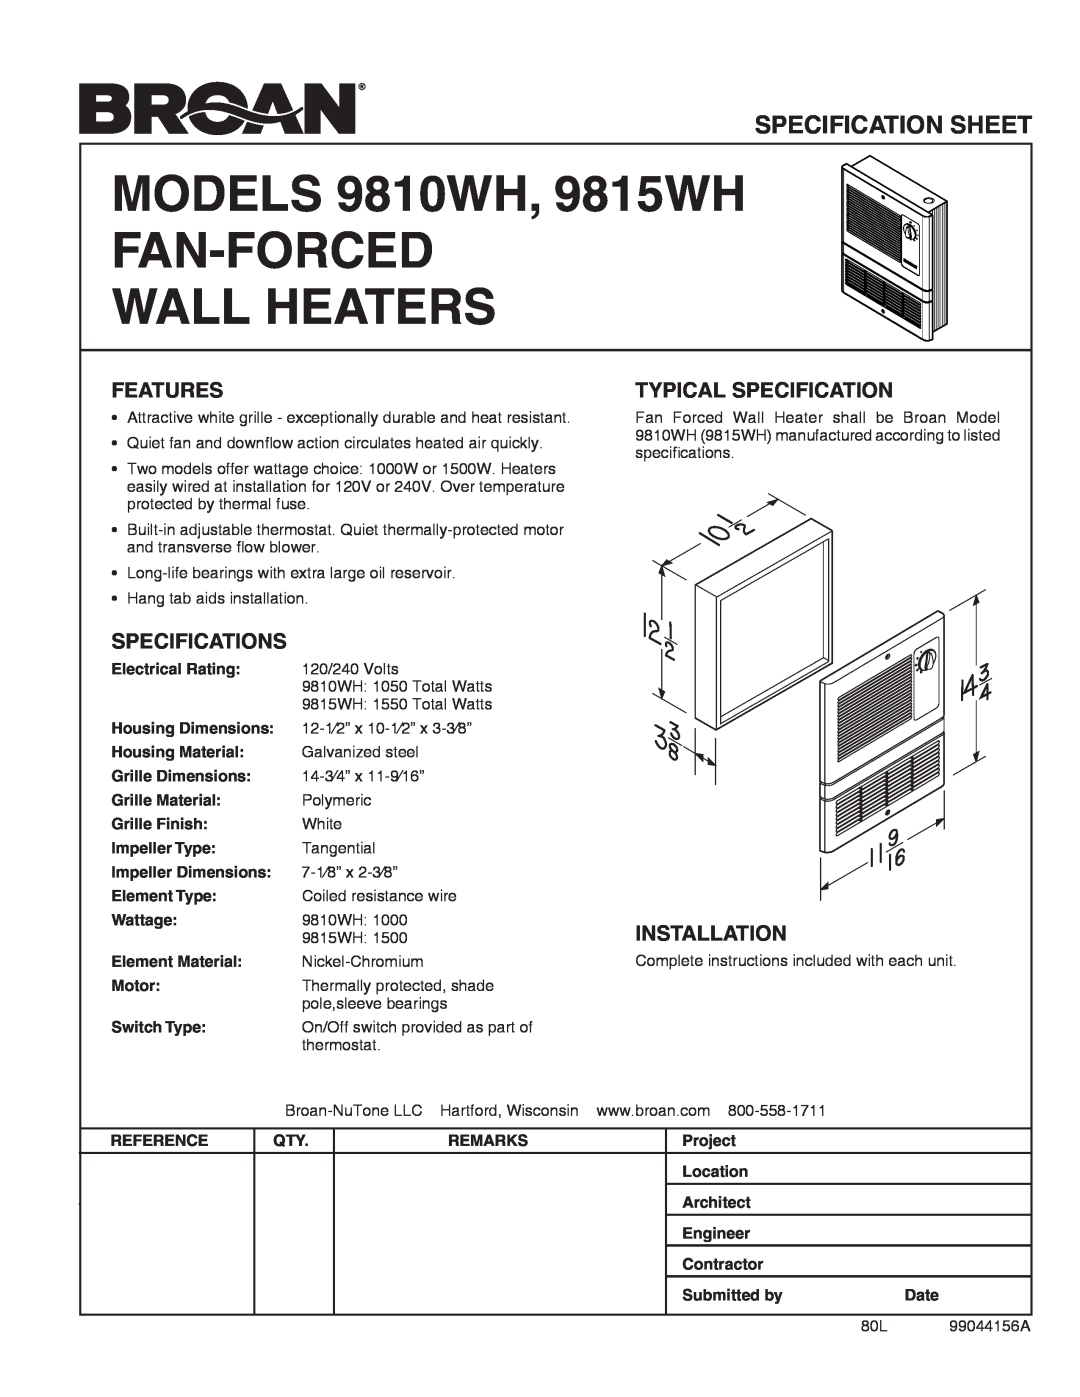 Broan specifications Models 9810WH, 9815WH Fan-Forced Wall Heaters, Specification Sheet, Features, Specifications 